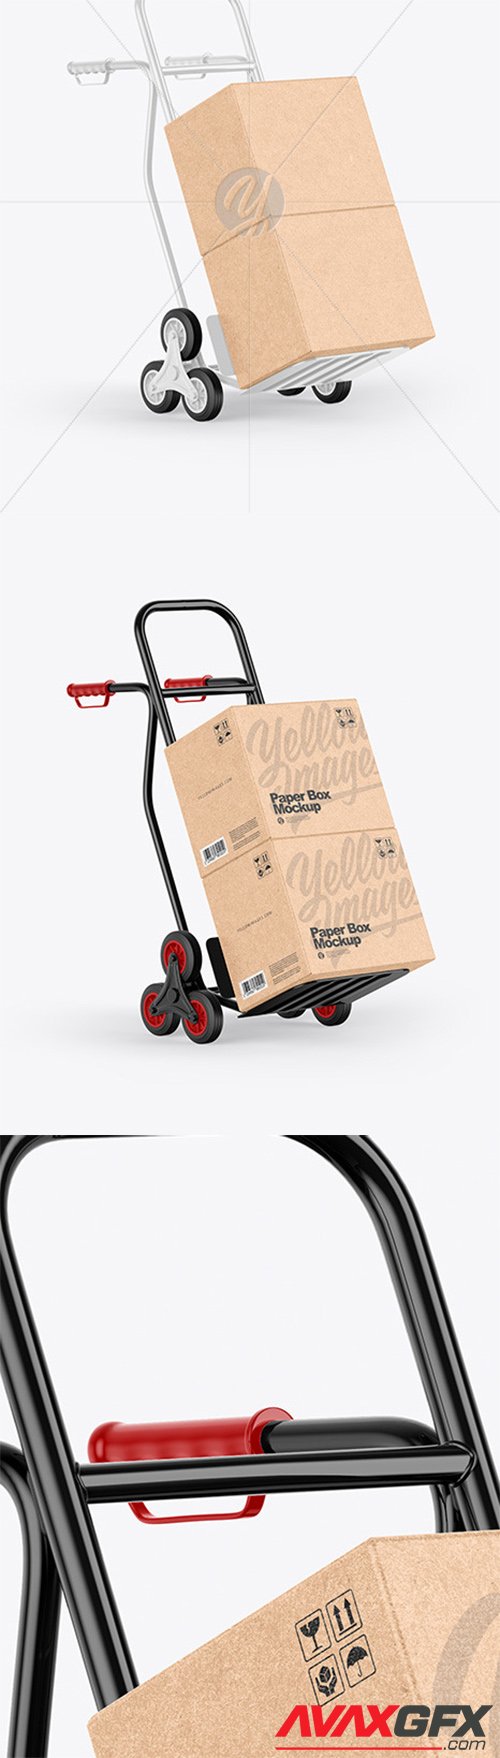 Hand Truck With Kraft Boxes Mockup 58381